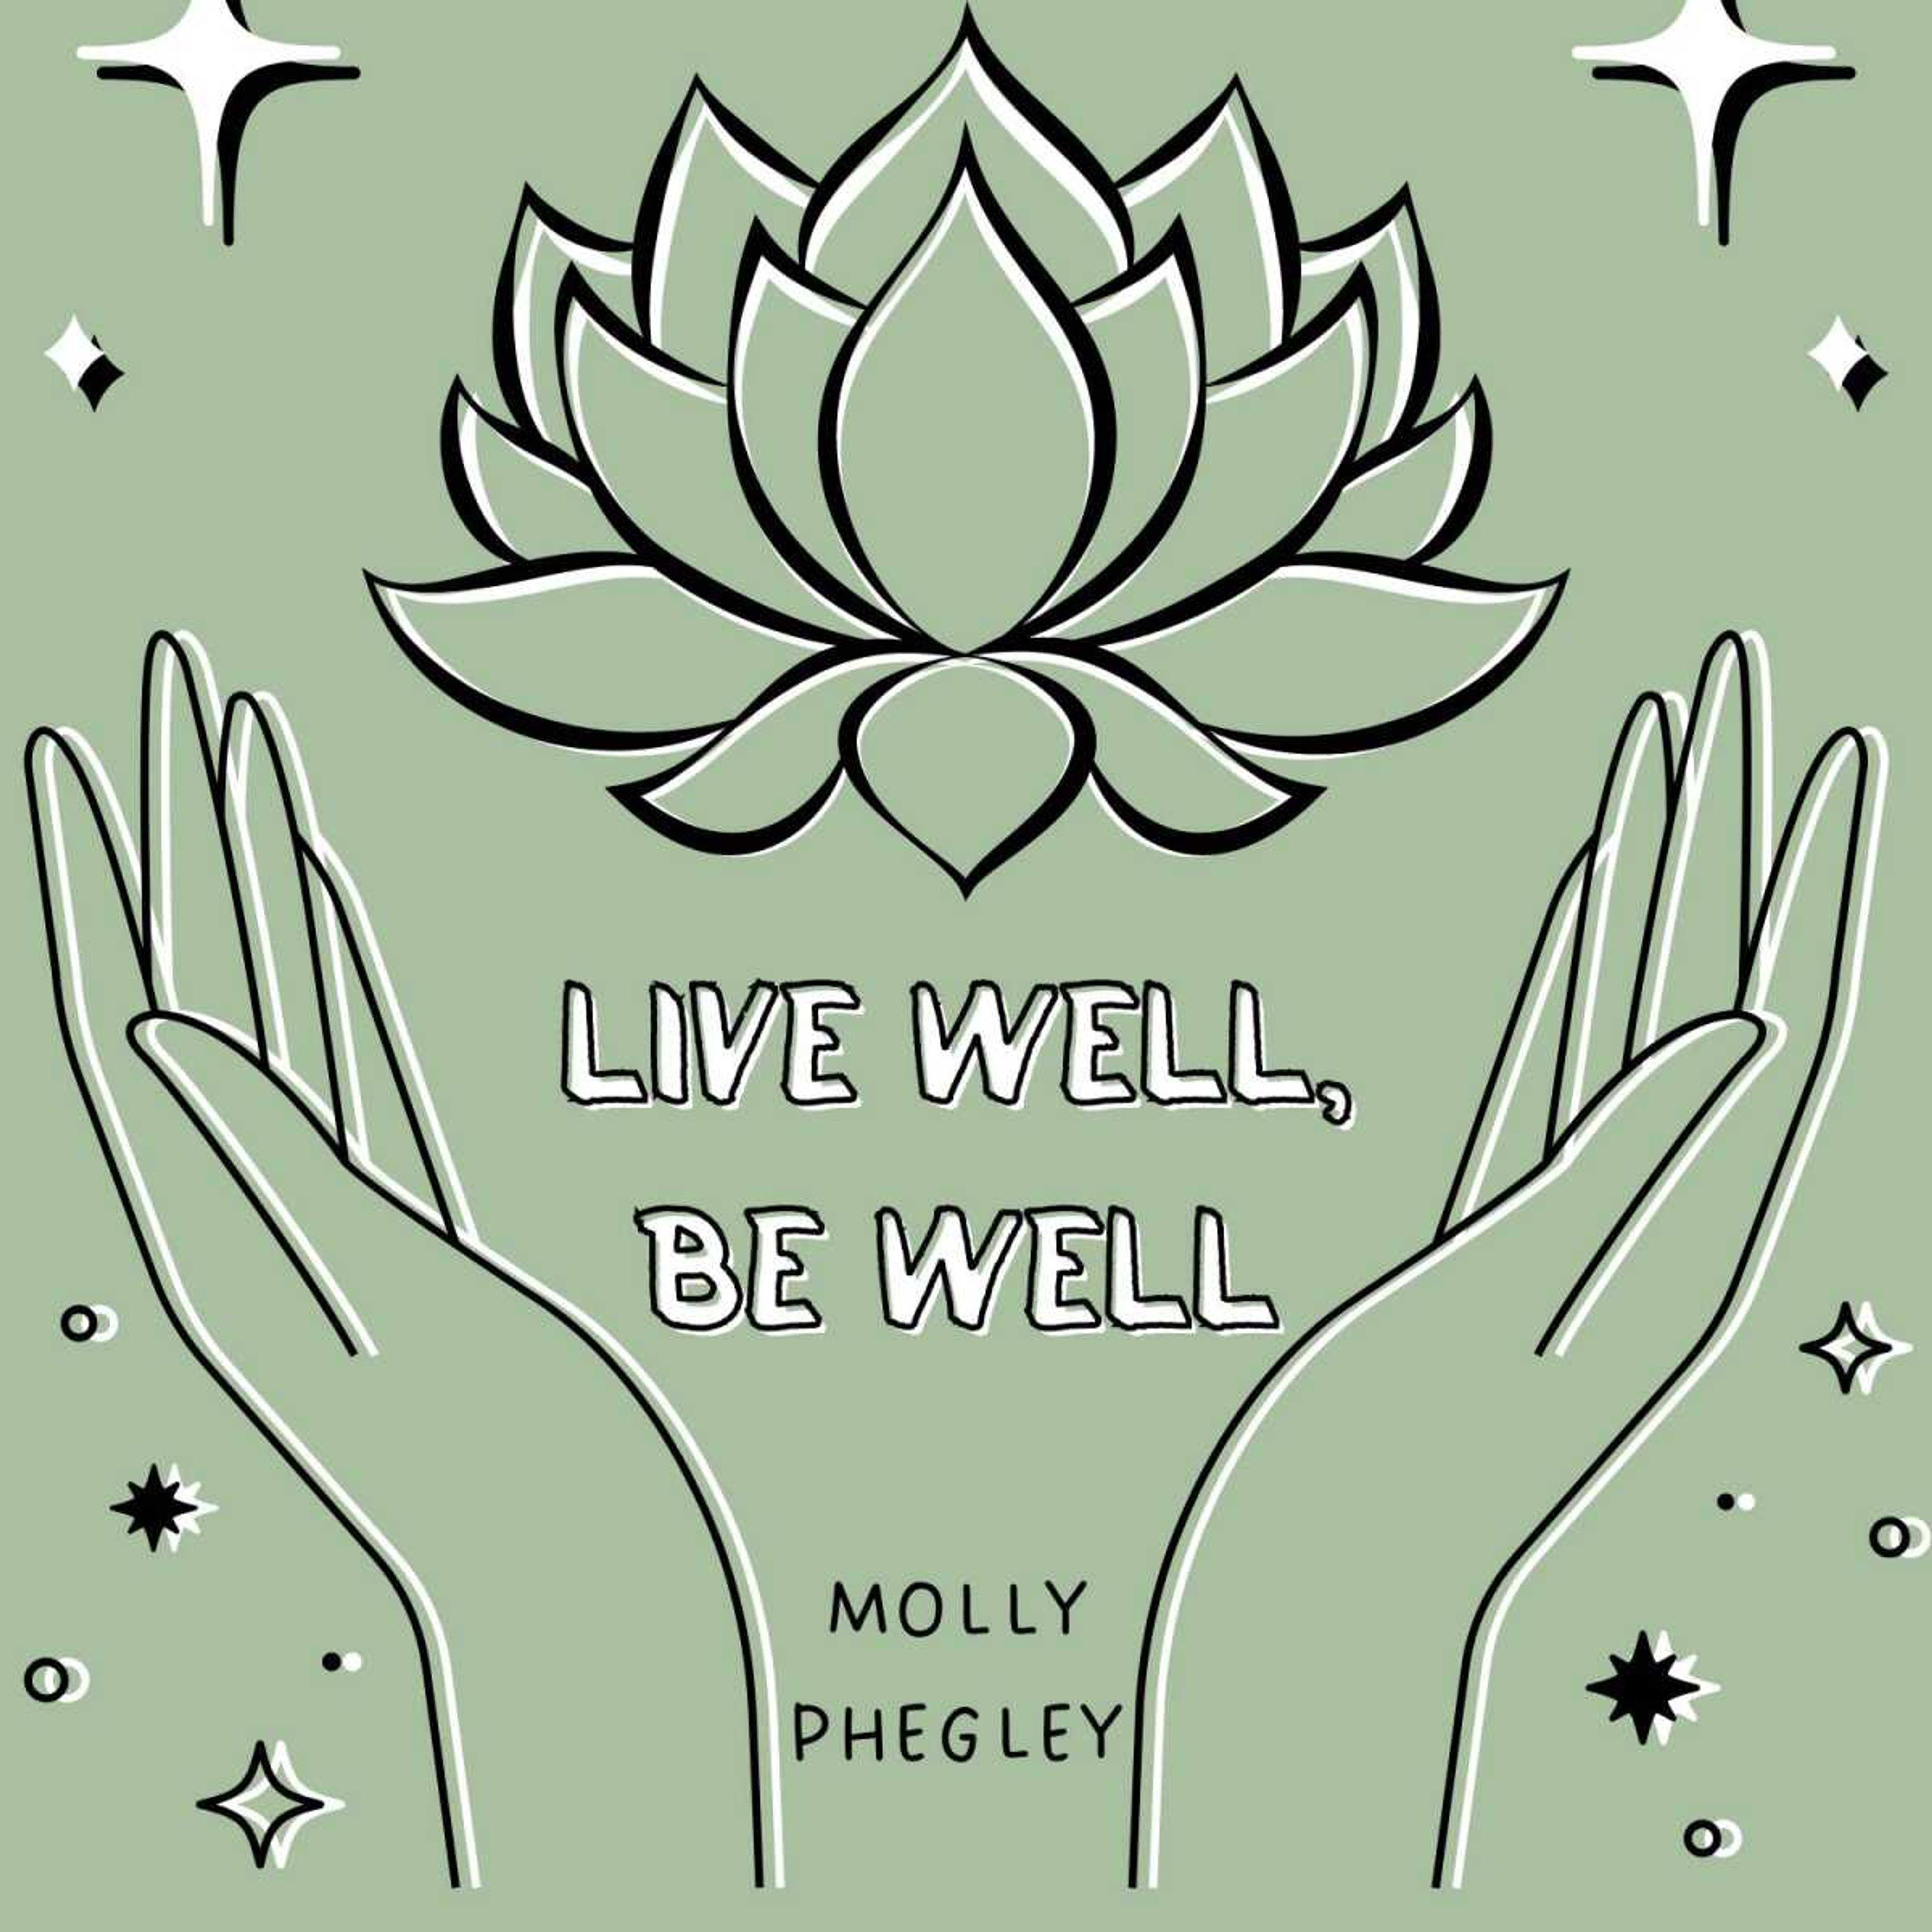 Live Well, Be Well: How to take your power back through words